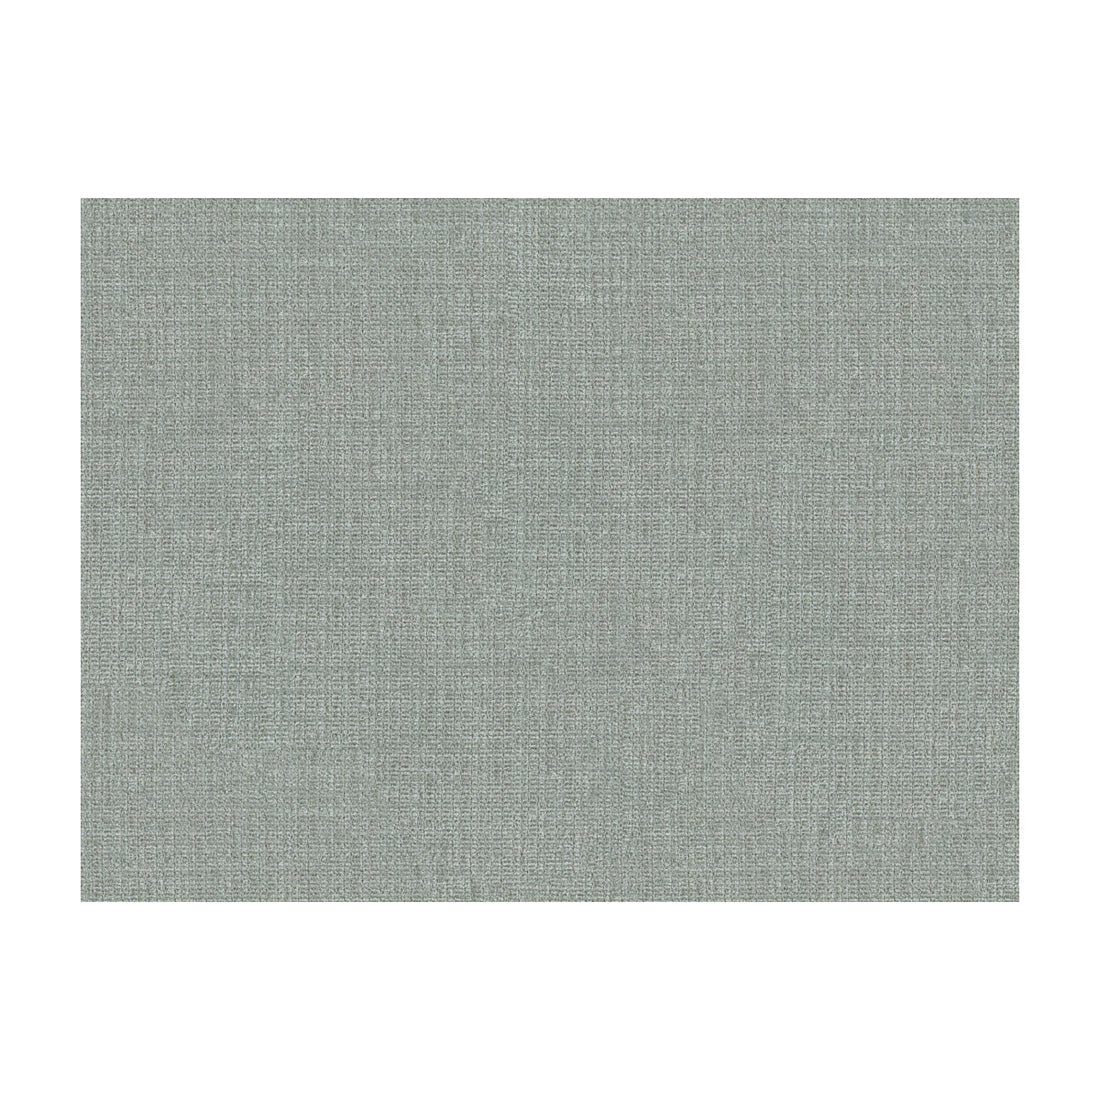 Judd fabric in grey color - pattern 2014132.18.0 - by Lee Jofa in the James Huniford Express collection